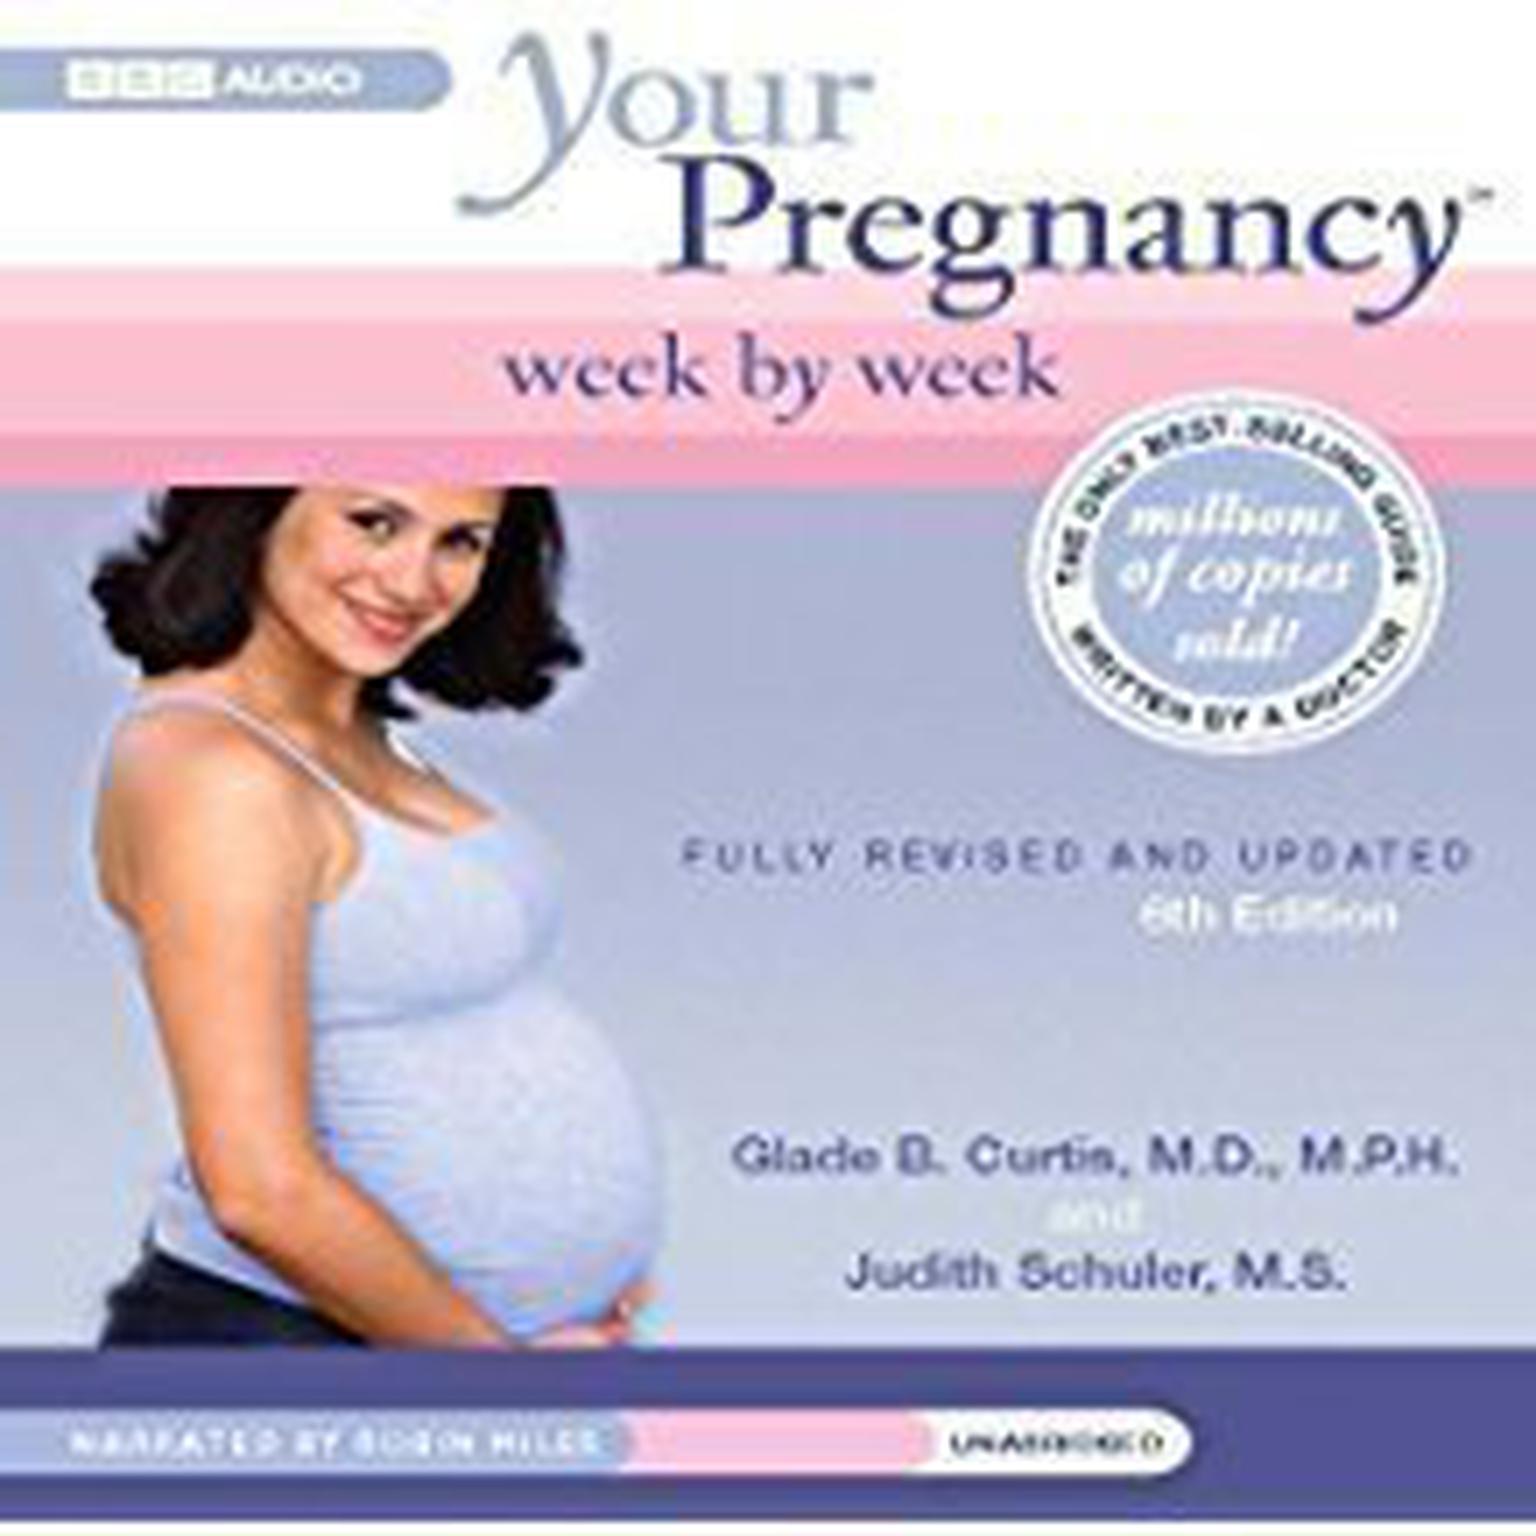 Your Pregnancy Week by Week, Second Trimester Audiobook, by Glade B. Curtis